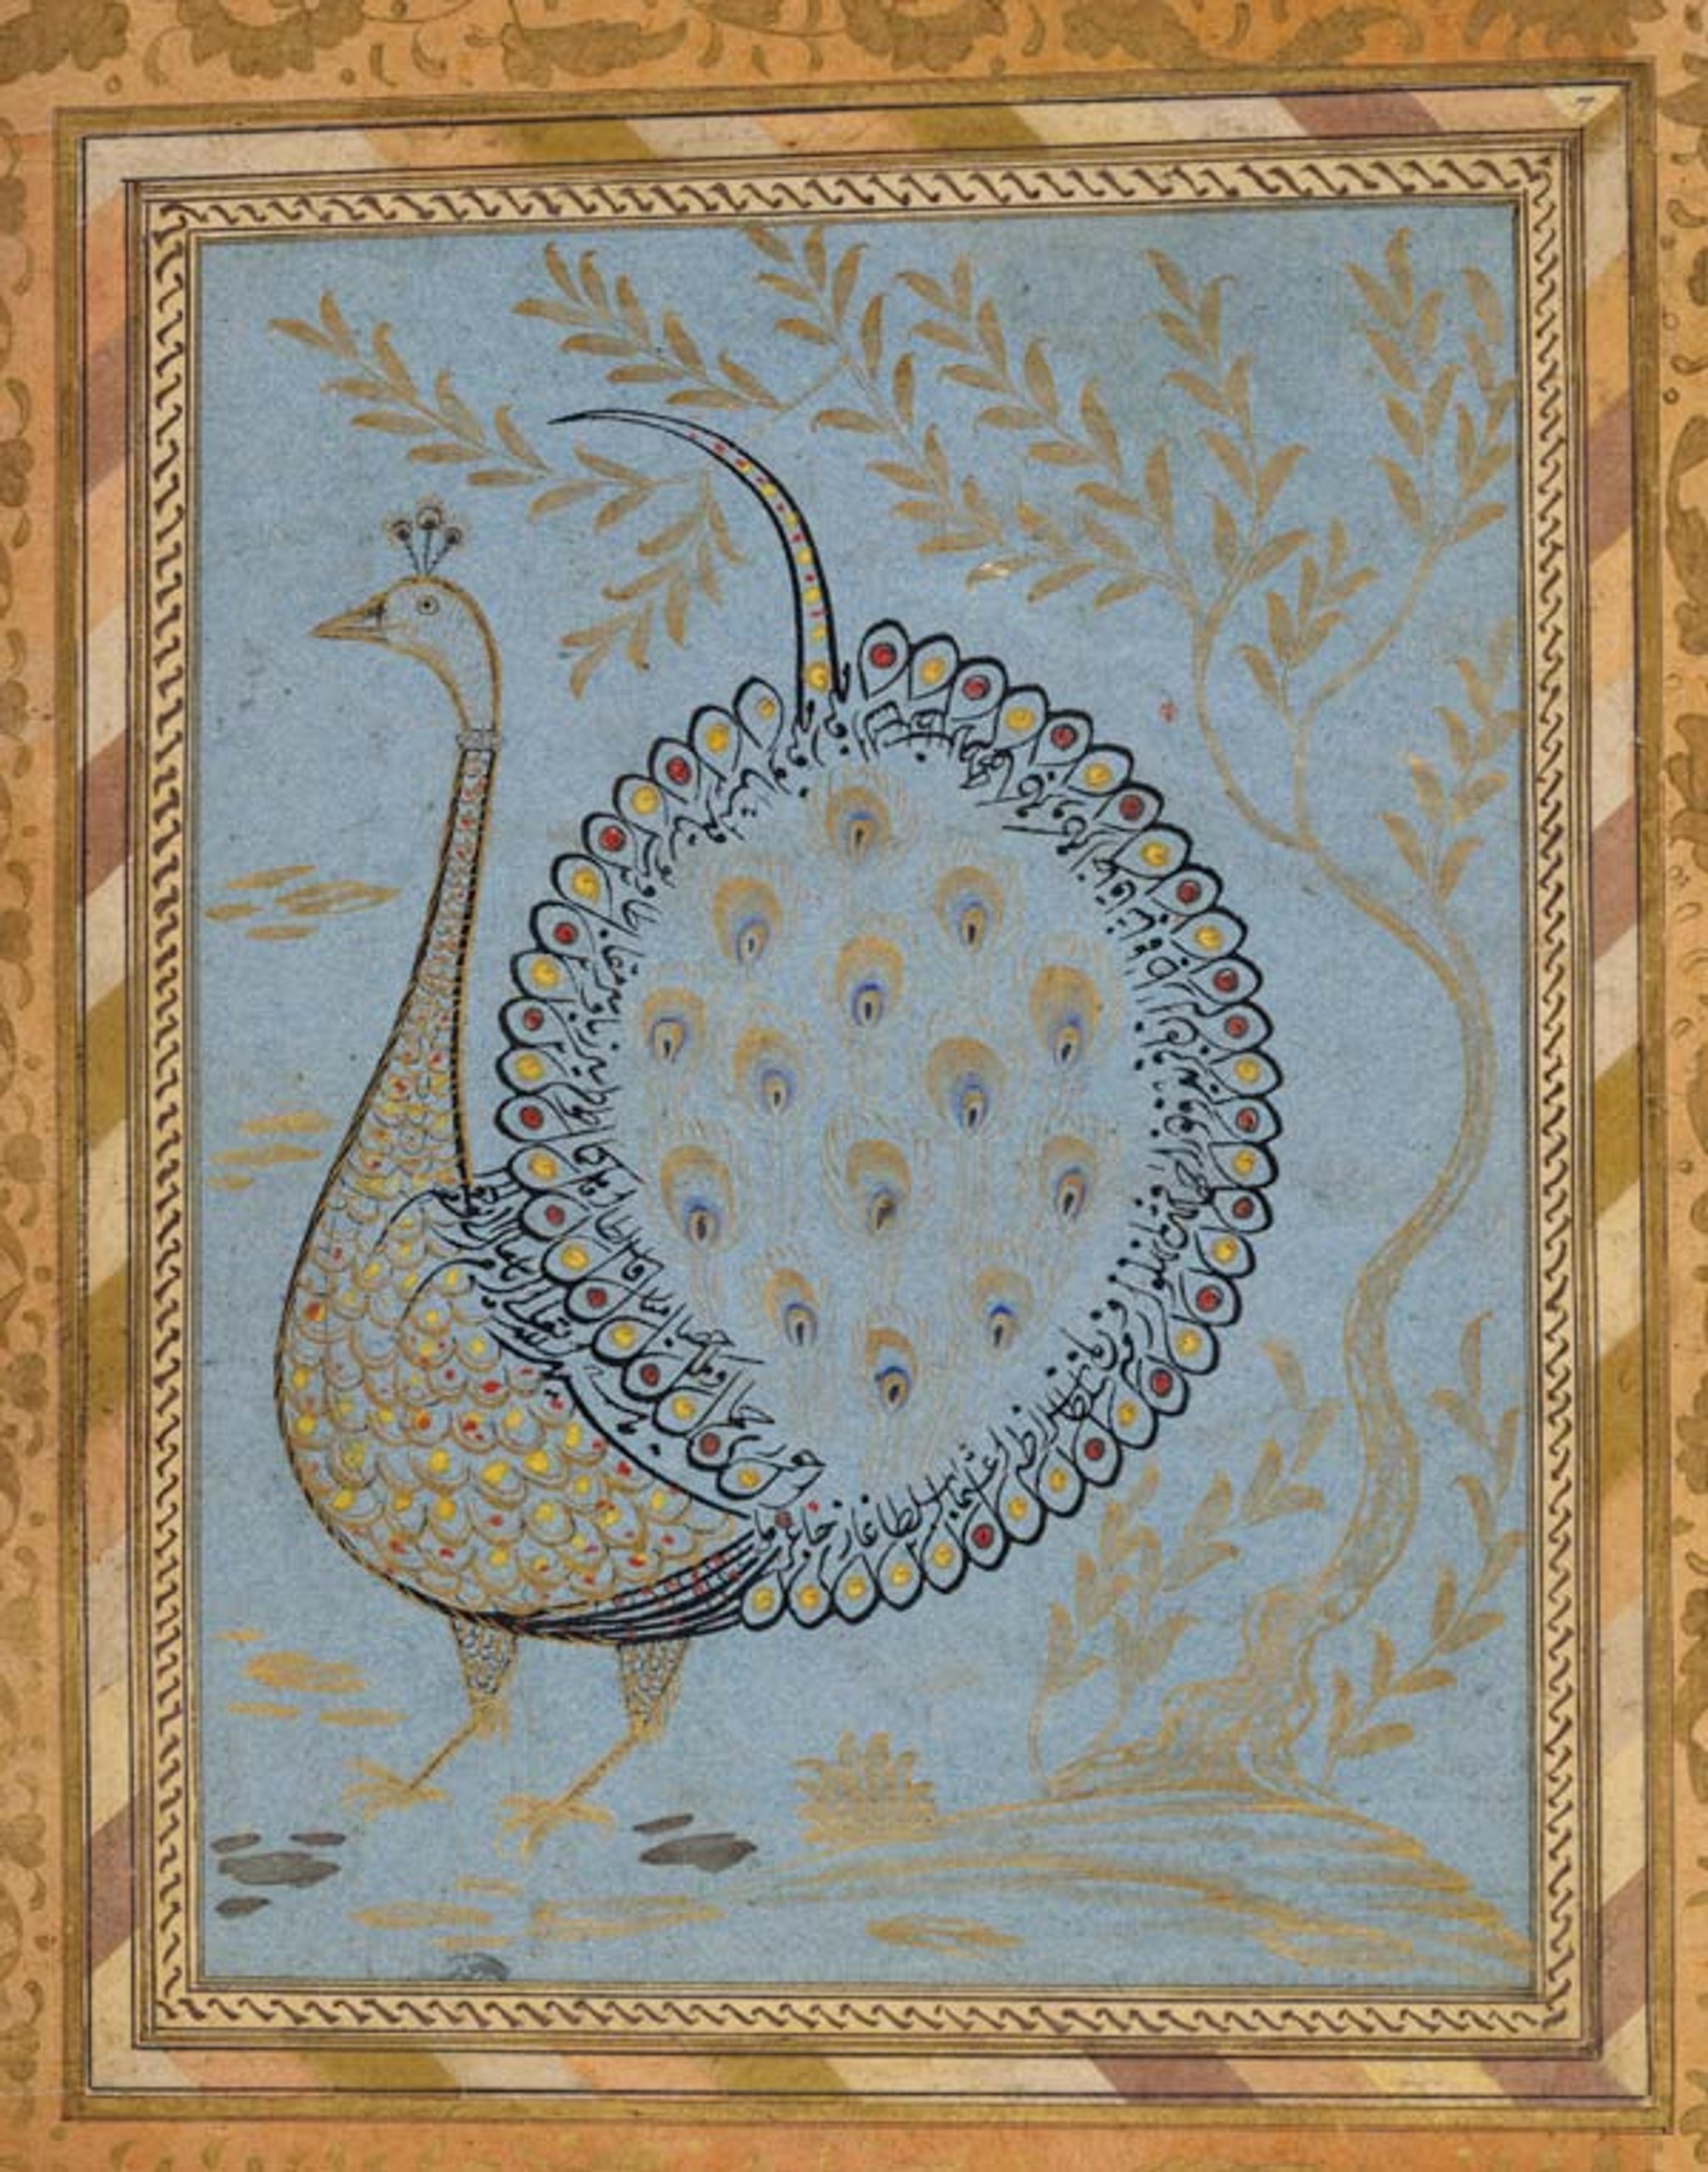 "Calligraphic Composition in Shape of Peacock," folio from the Bellini Album, ca. 1600. Print: Italy or the Netherlands; album: Turkey. Ink, opaque watercolor, and gold on paper; H. 9 9/16 in. (24.3 cm), W. 7 1/16 in. (17.9 cm). The Metropolitan Museum of Art, New York, Louis V. Bell Fund, 1967 (67.266.7.8r)